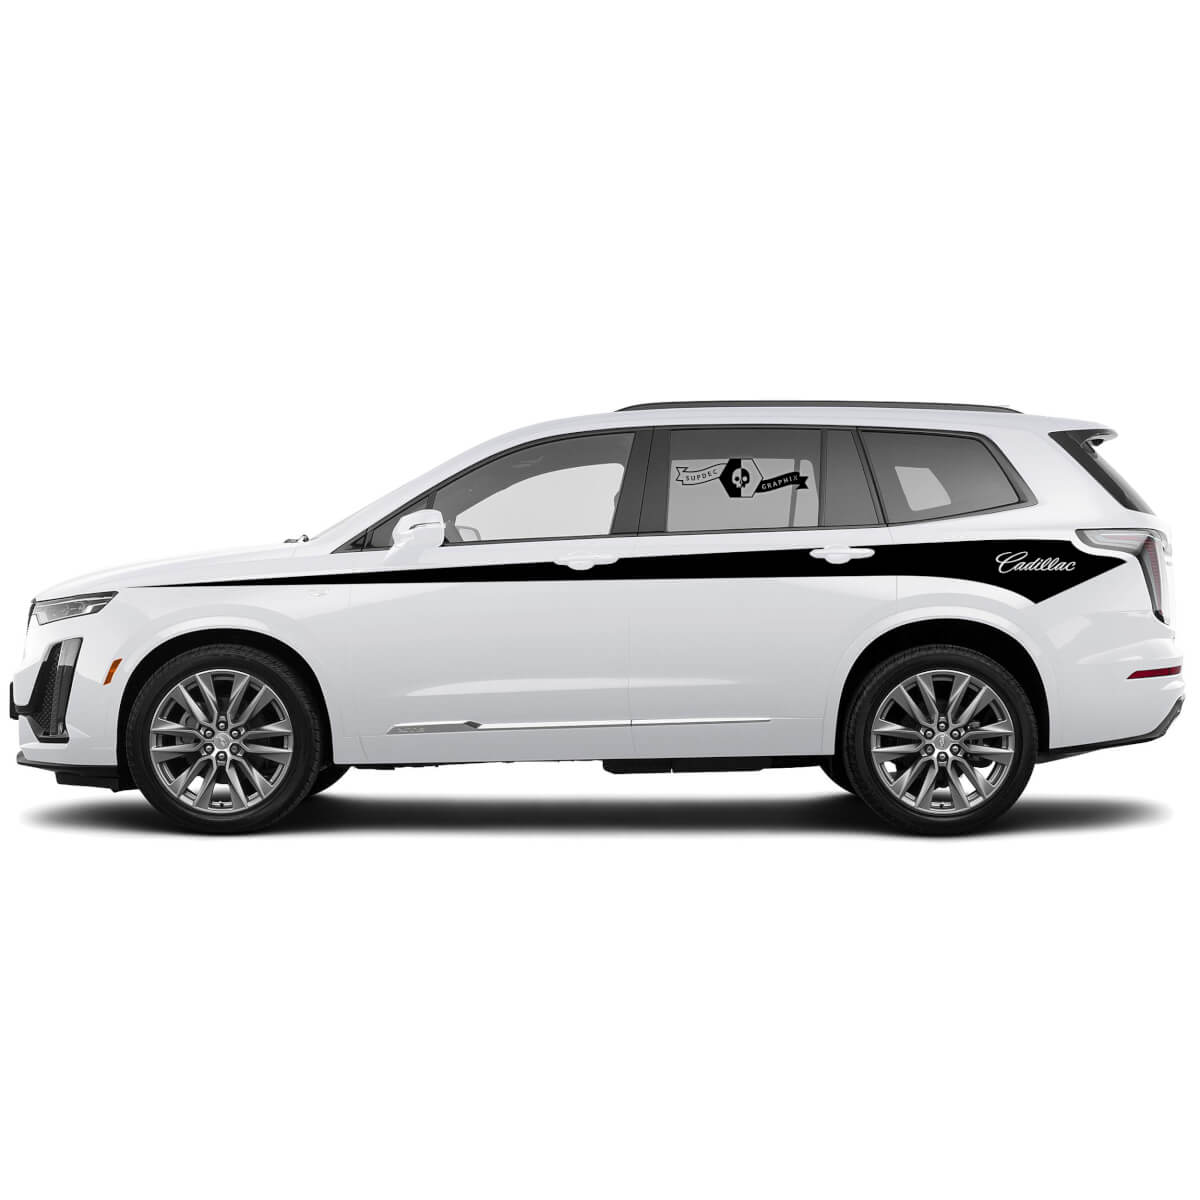 2021 Cadillac XT6 Side Pin stripe SUV Vinyl Decals Stickers
